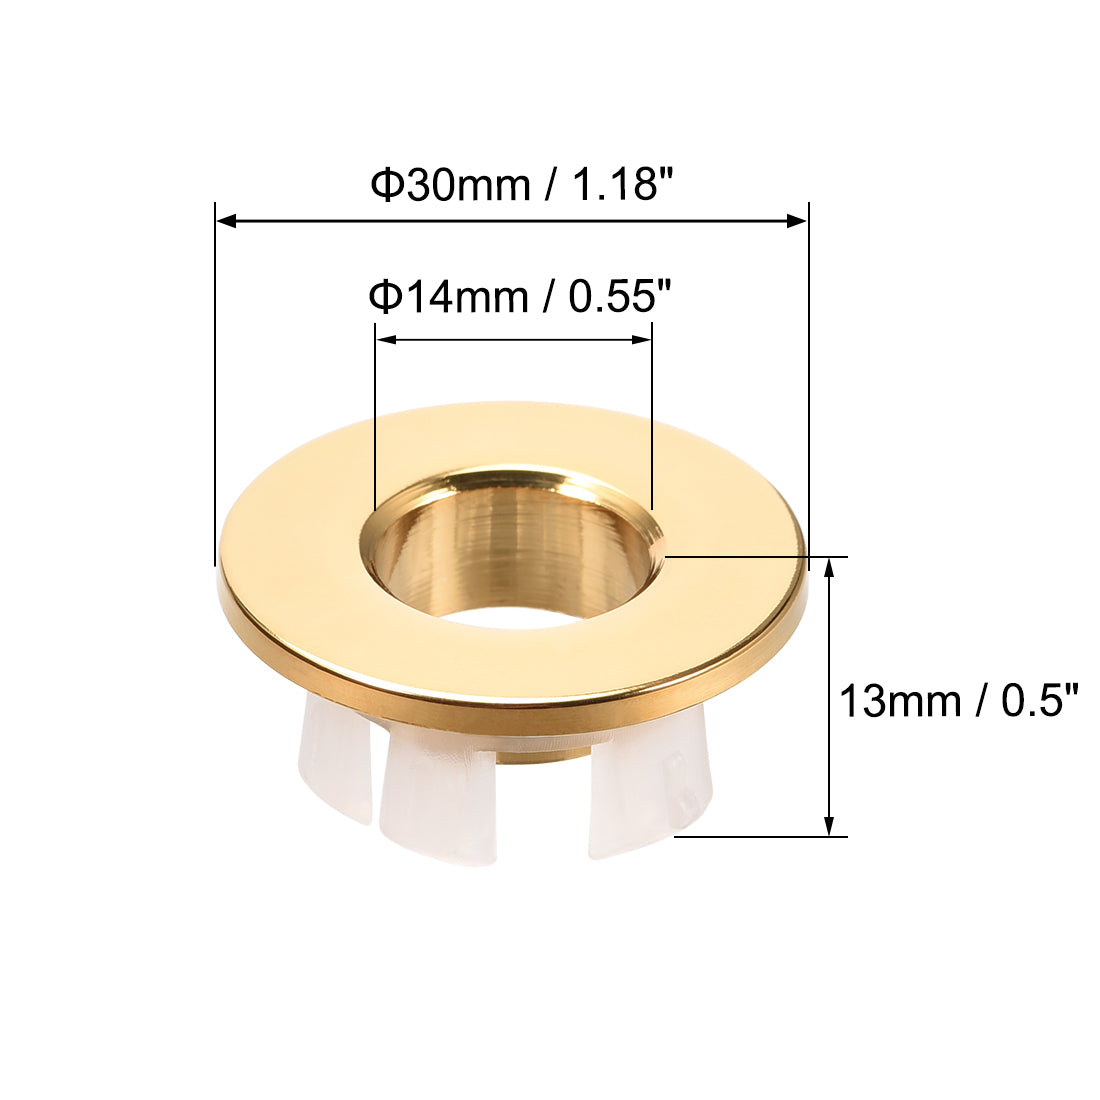 uxcell Uxcell Sink Overflow Covers Kitchen Basin Trim Round Hole Caps Insert Spares Gold Tone 2 Pcs